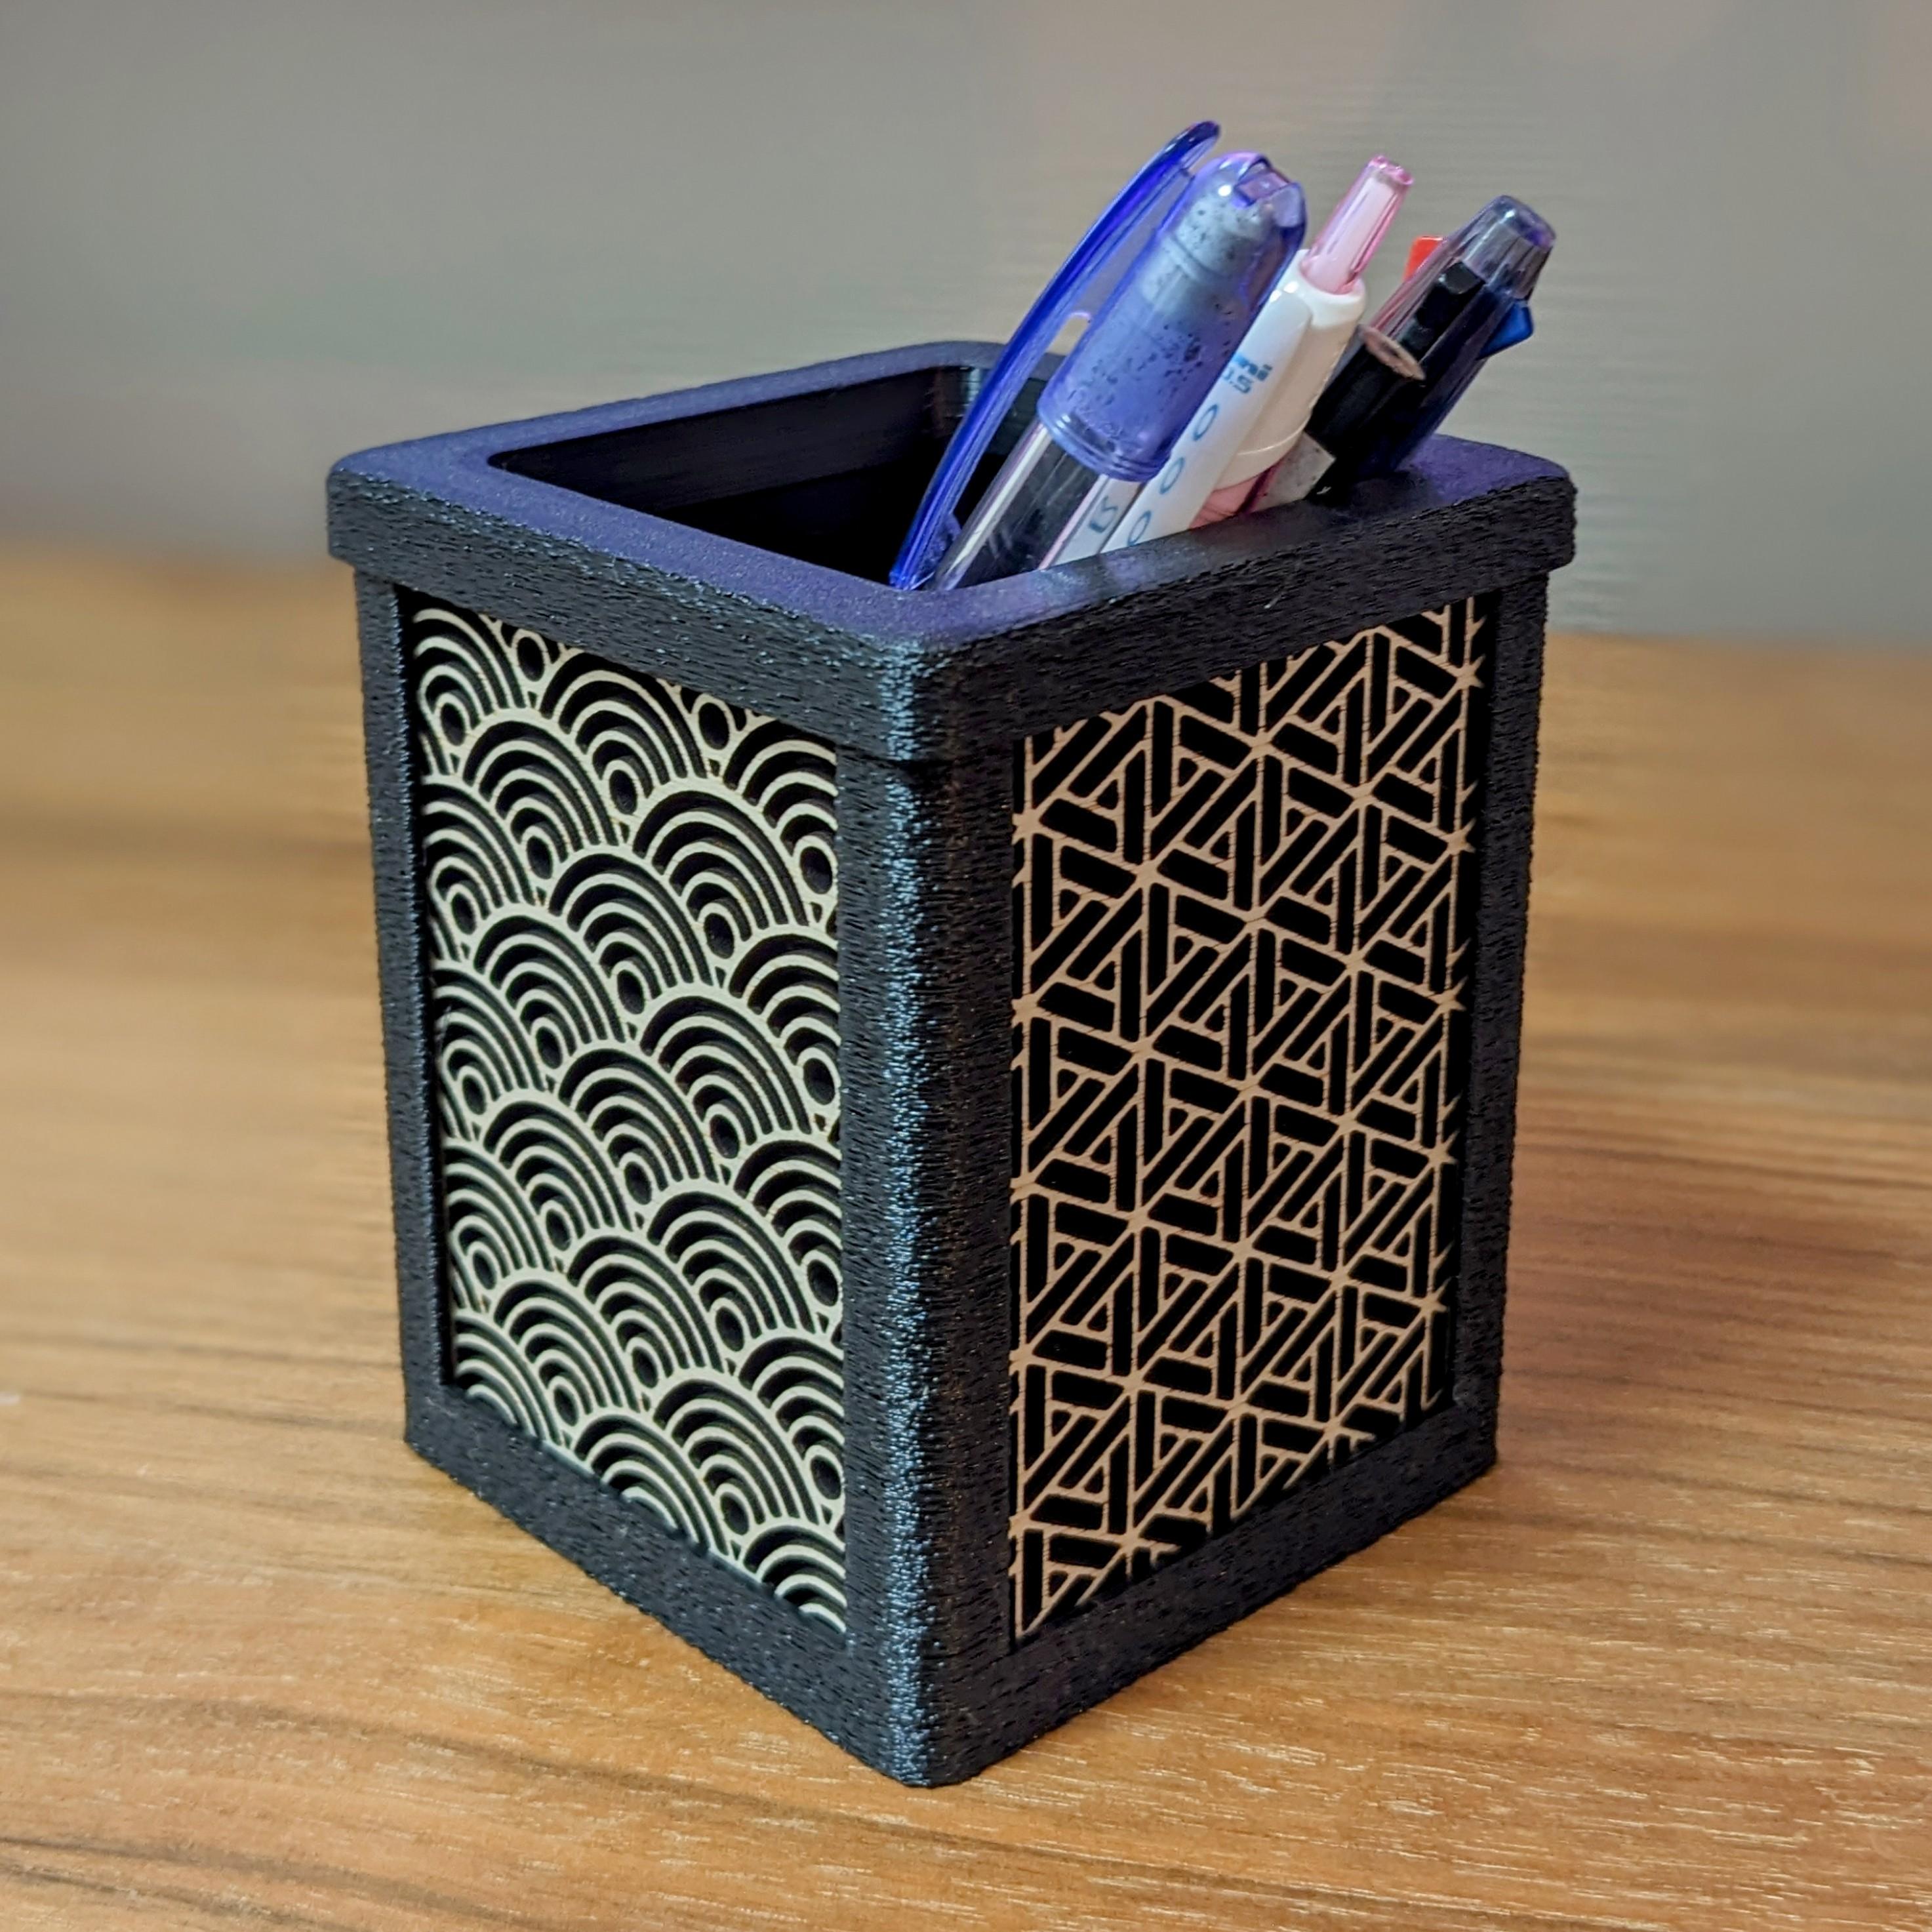 PEN HOLDER WITH JAPANESE STYLE PANEL INLAYS 3d model